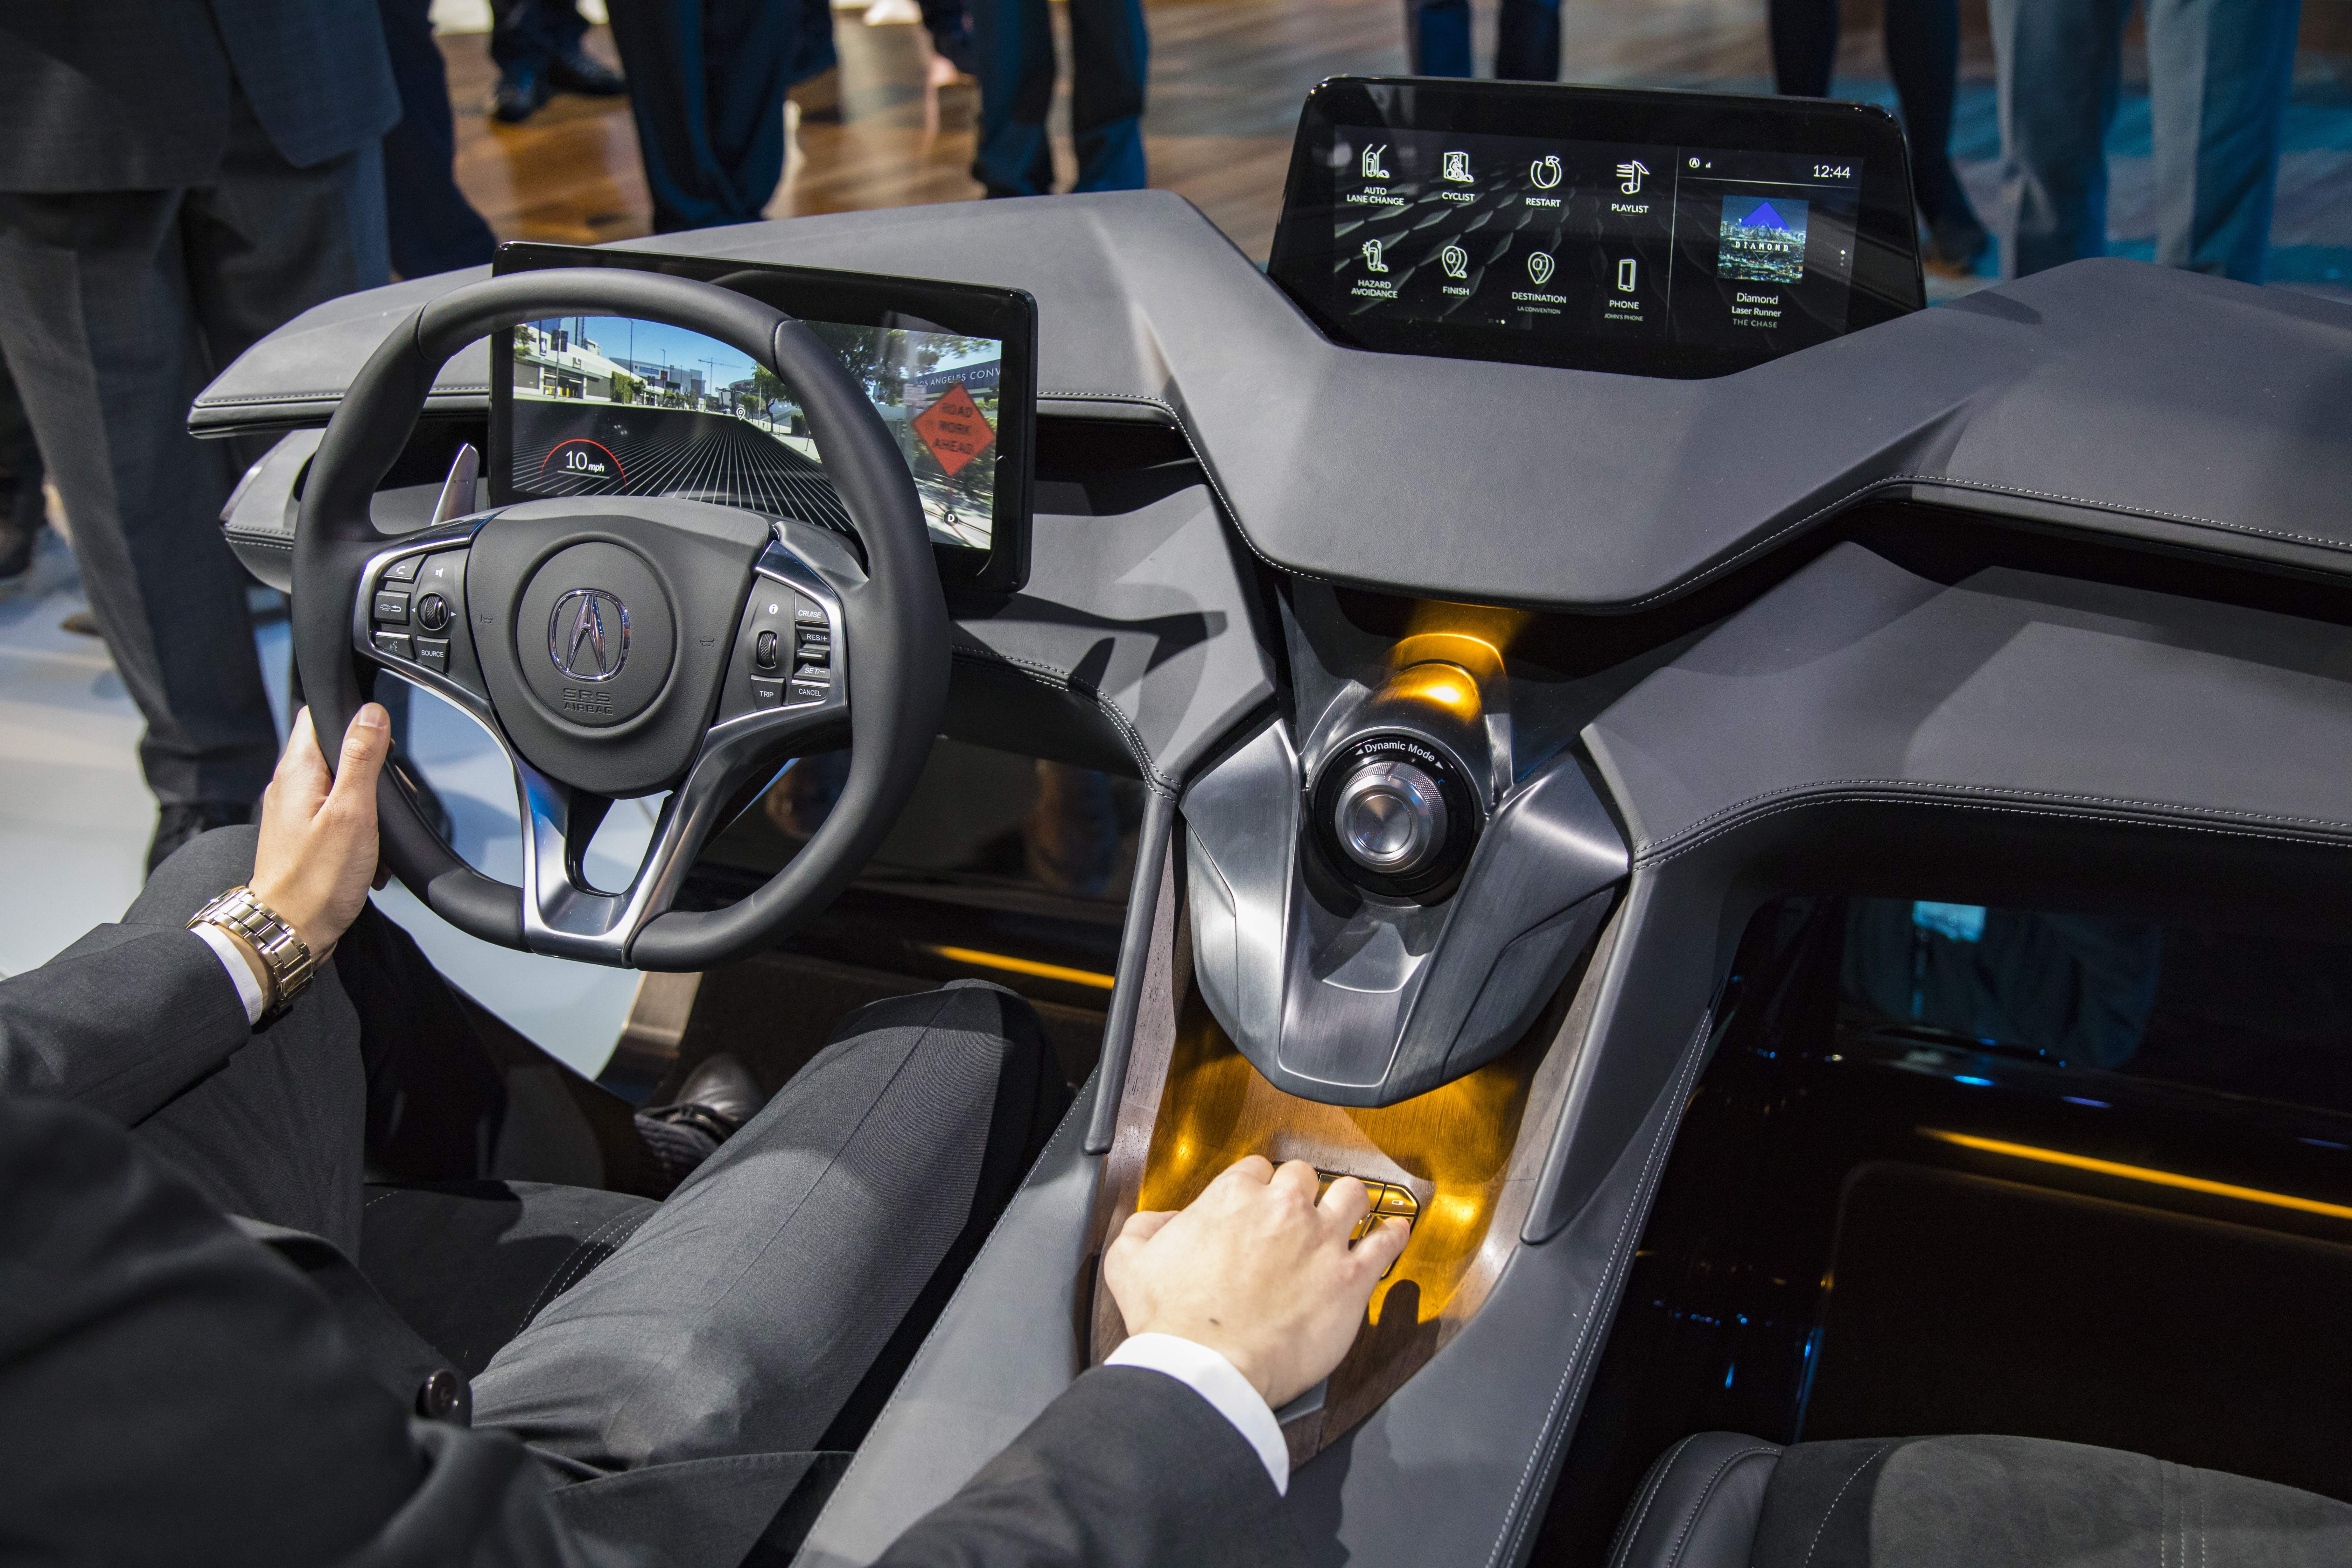 Acura Precision Cockpit revealed at the 2016 Los Angeles Auto Show on November 16